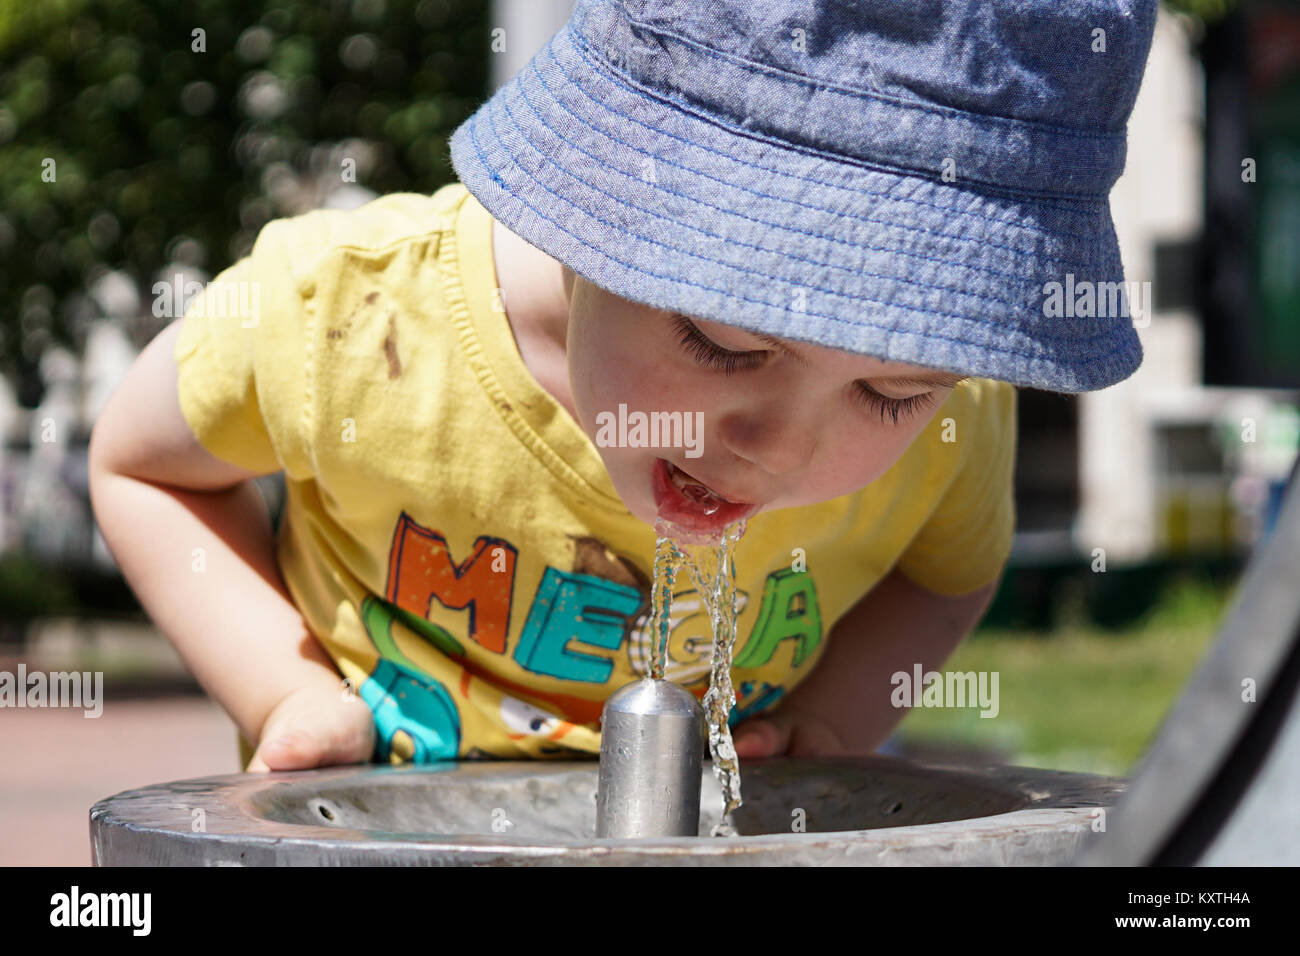 A thirsty boy drinking water from the fountain. Stock Photo